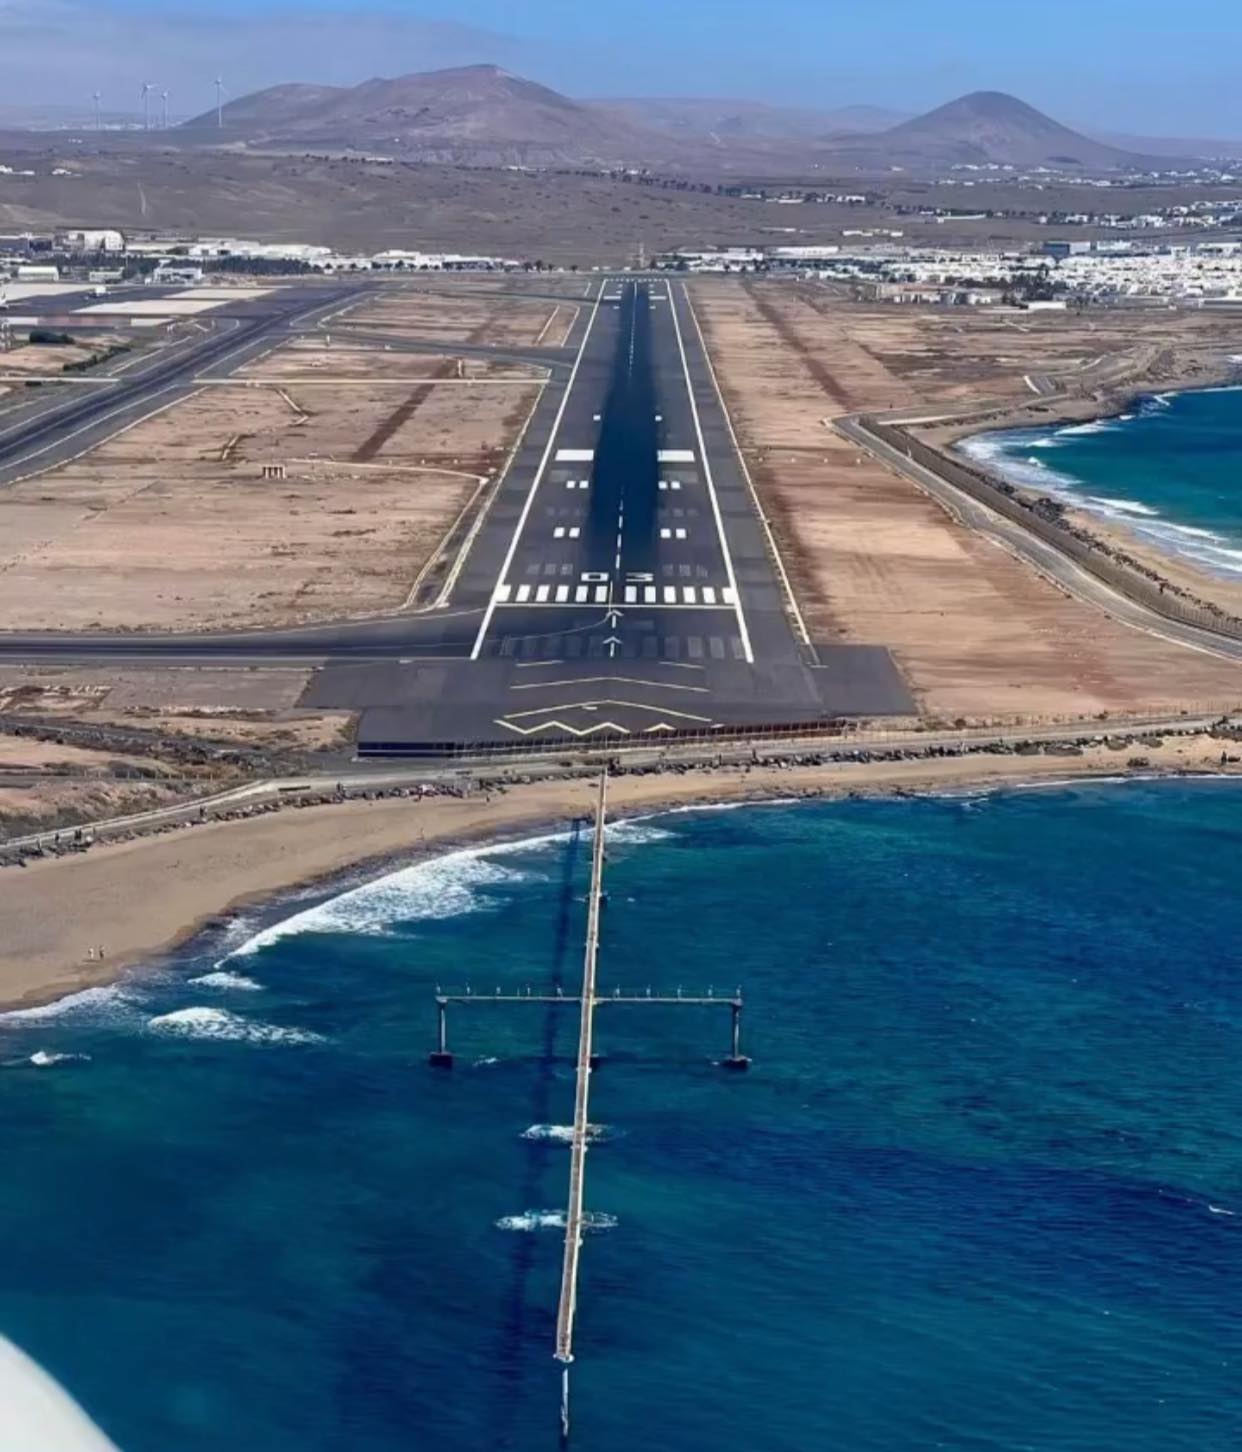 an airport runway with a body of water and mountains in the background